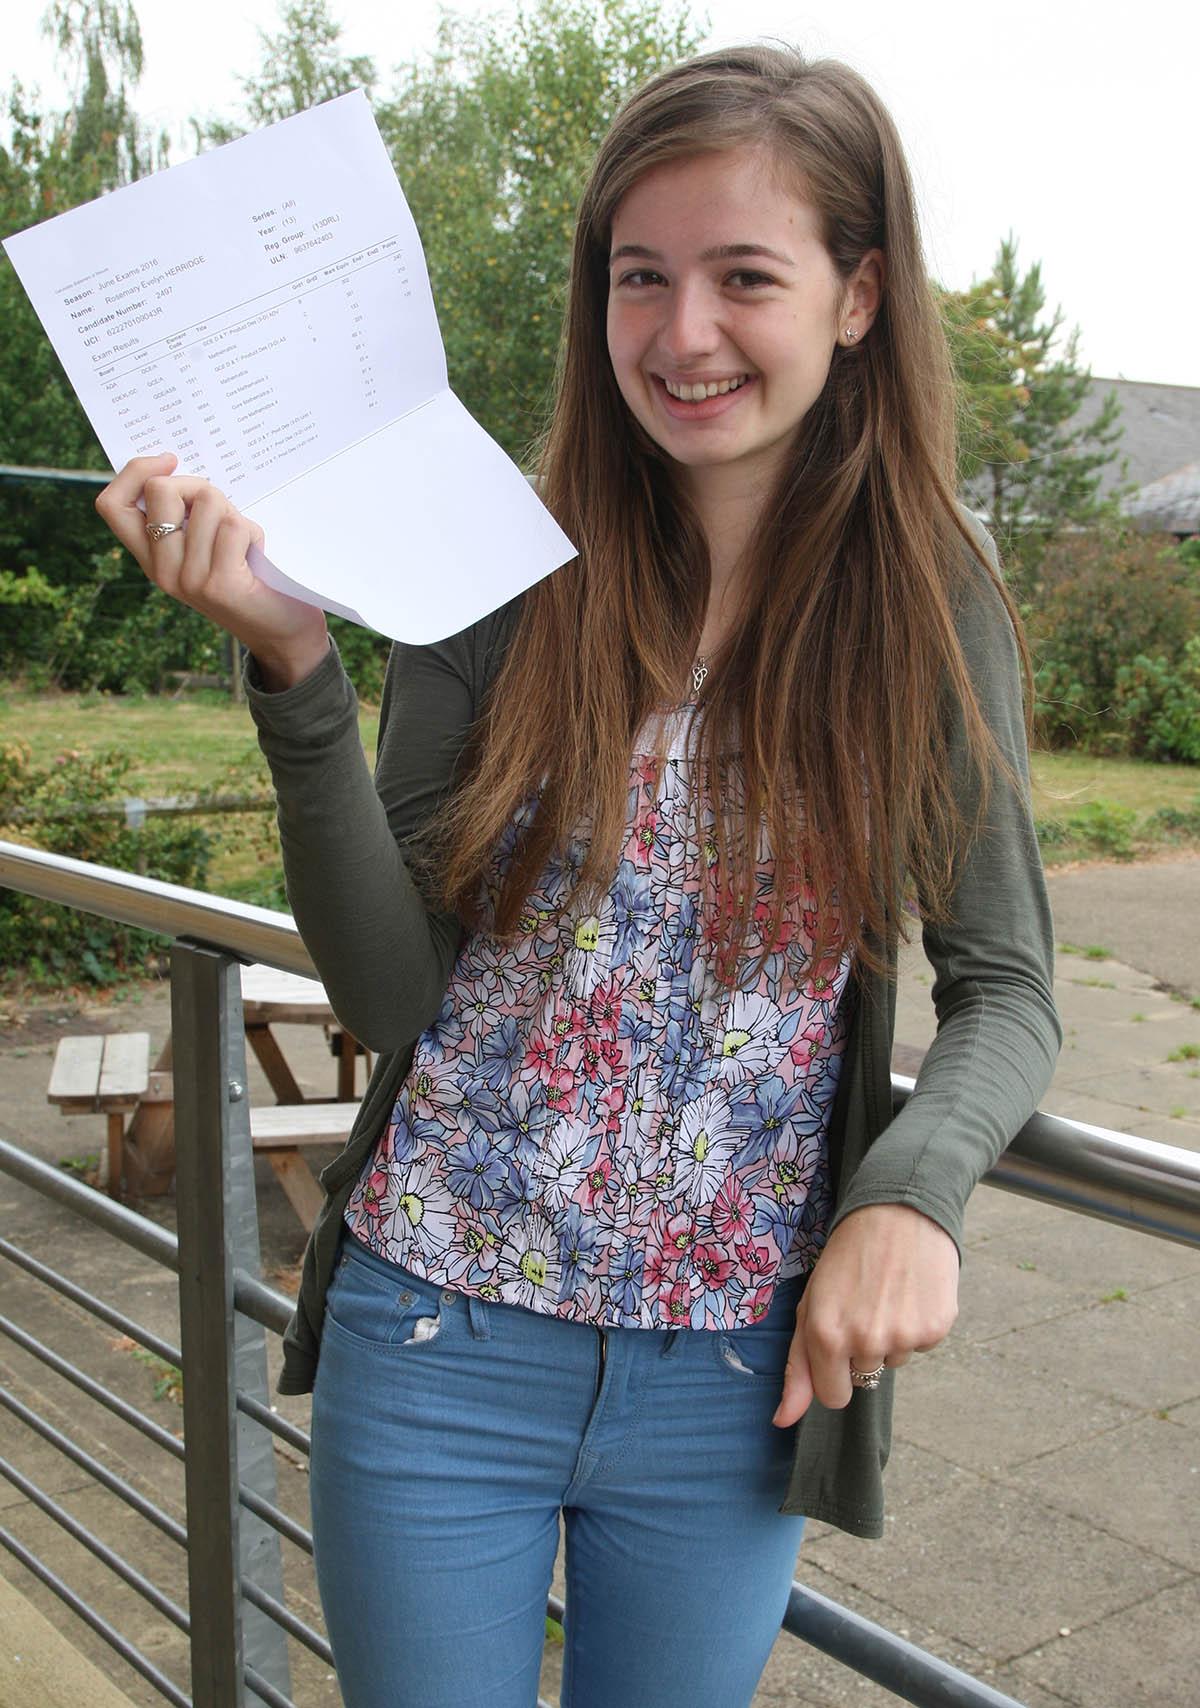 Pictures from around Oxfordshire of student receiving their A Level results Wood Green School Witney